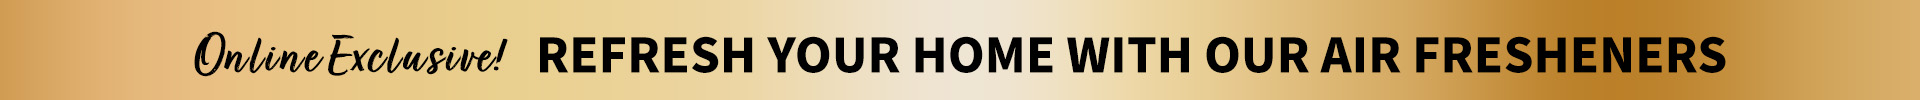 STORES and ONLINE HOME FRAGRANCE EVENT